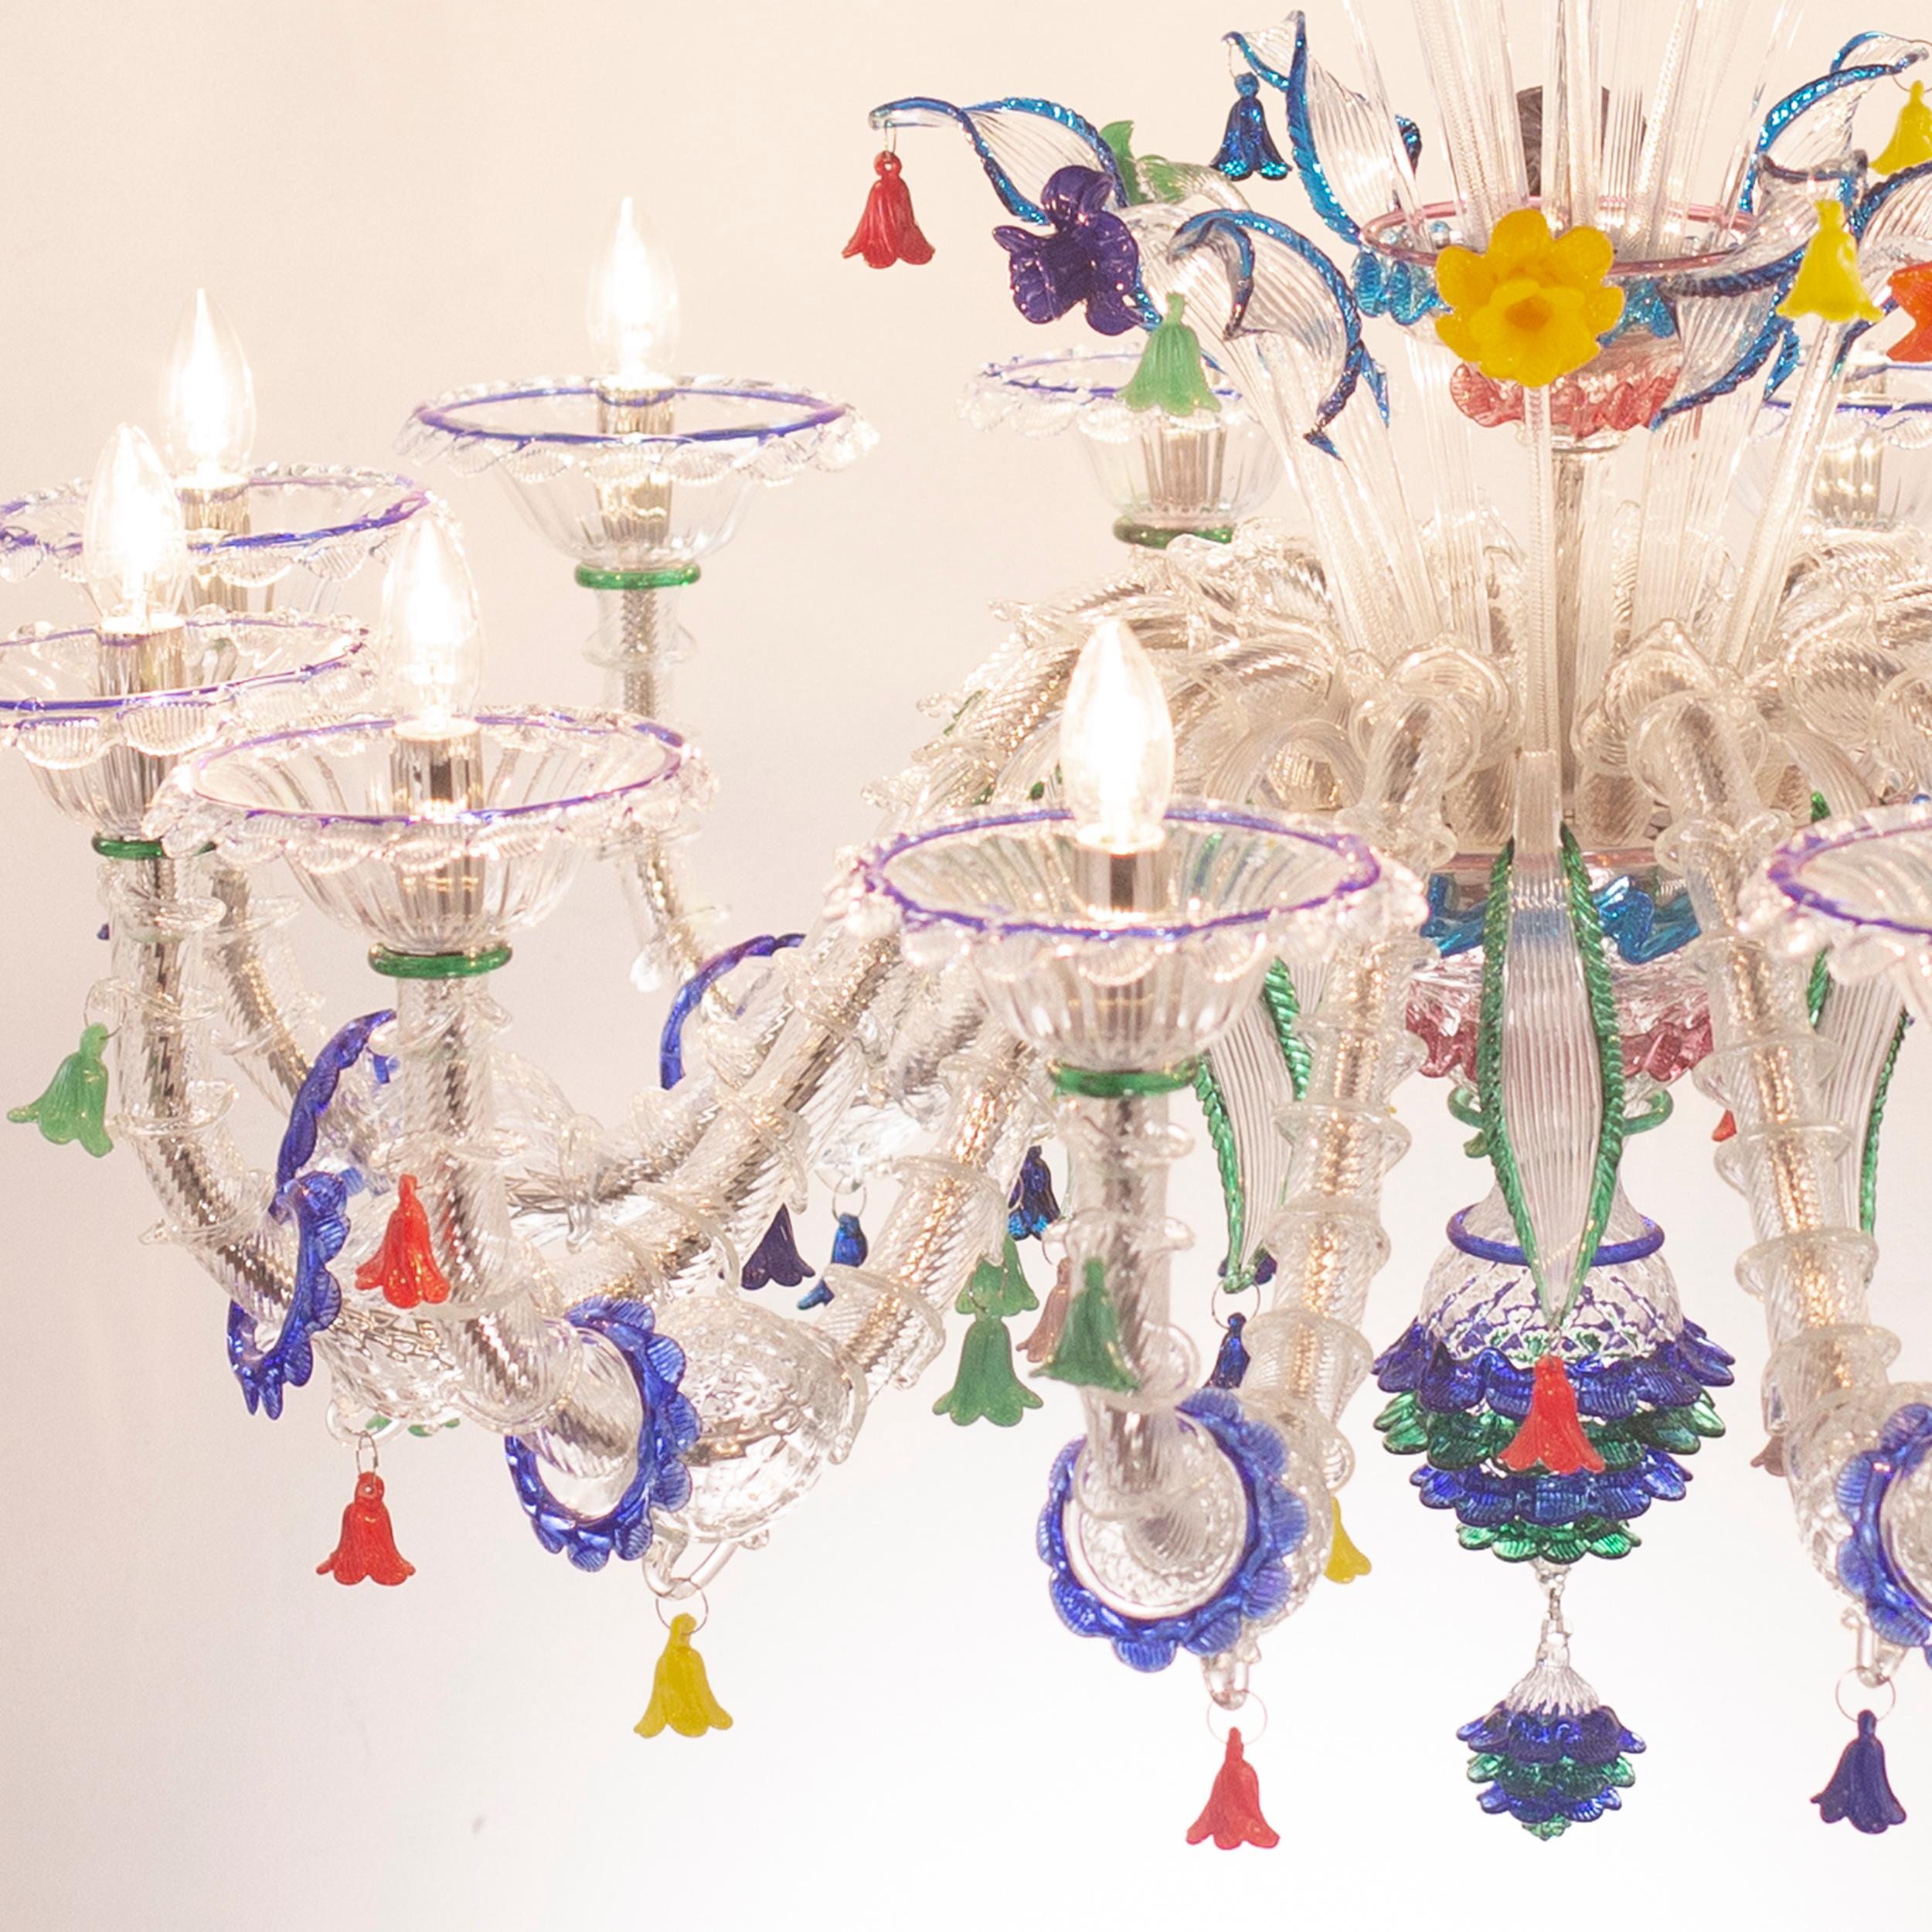 Artistic Murano chandelier height 100 cm, 12-light, clear Murano glass, polychrome details by Multiforme.
The artistic glass chandelier is an elegant and delicate lighting work, colored with hard-paste tones. The structure is a combination of well